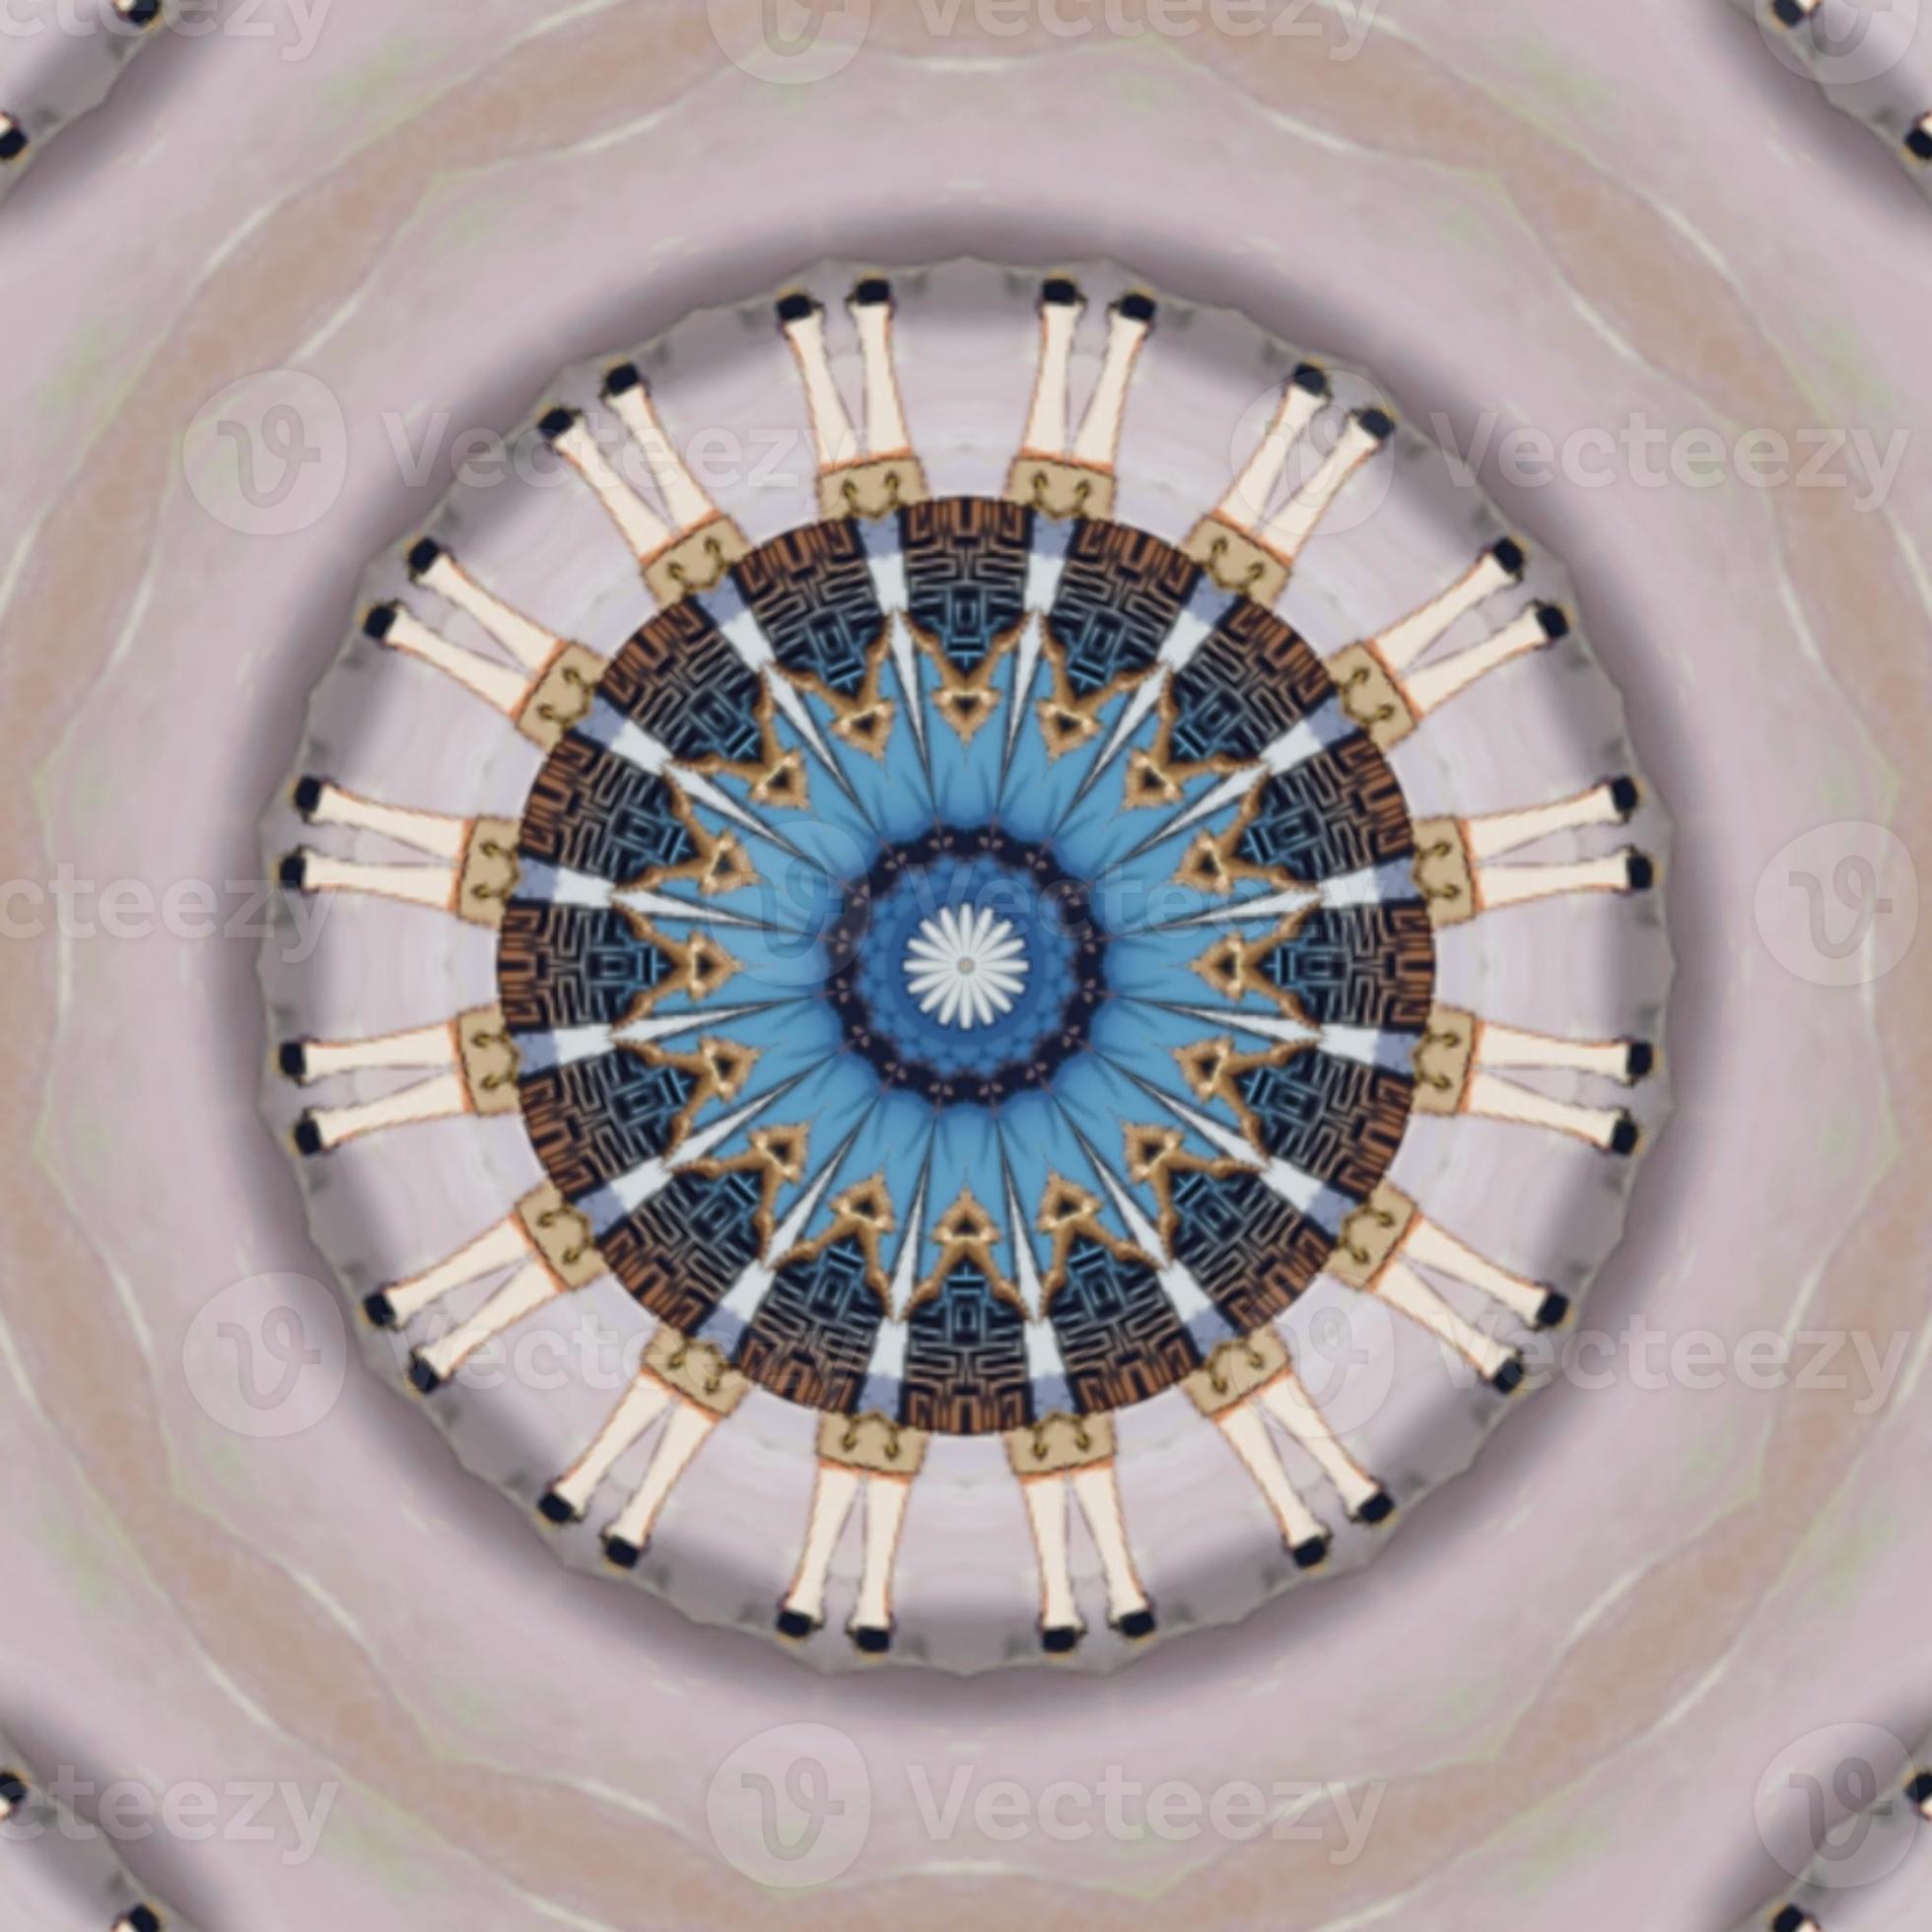 A circular pattern with blue and white colors - Architecture